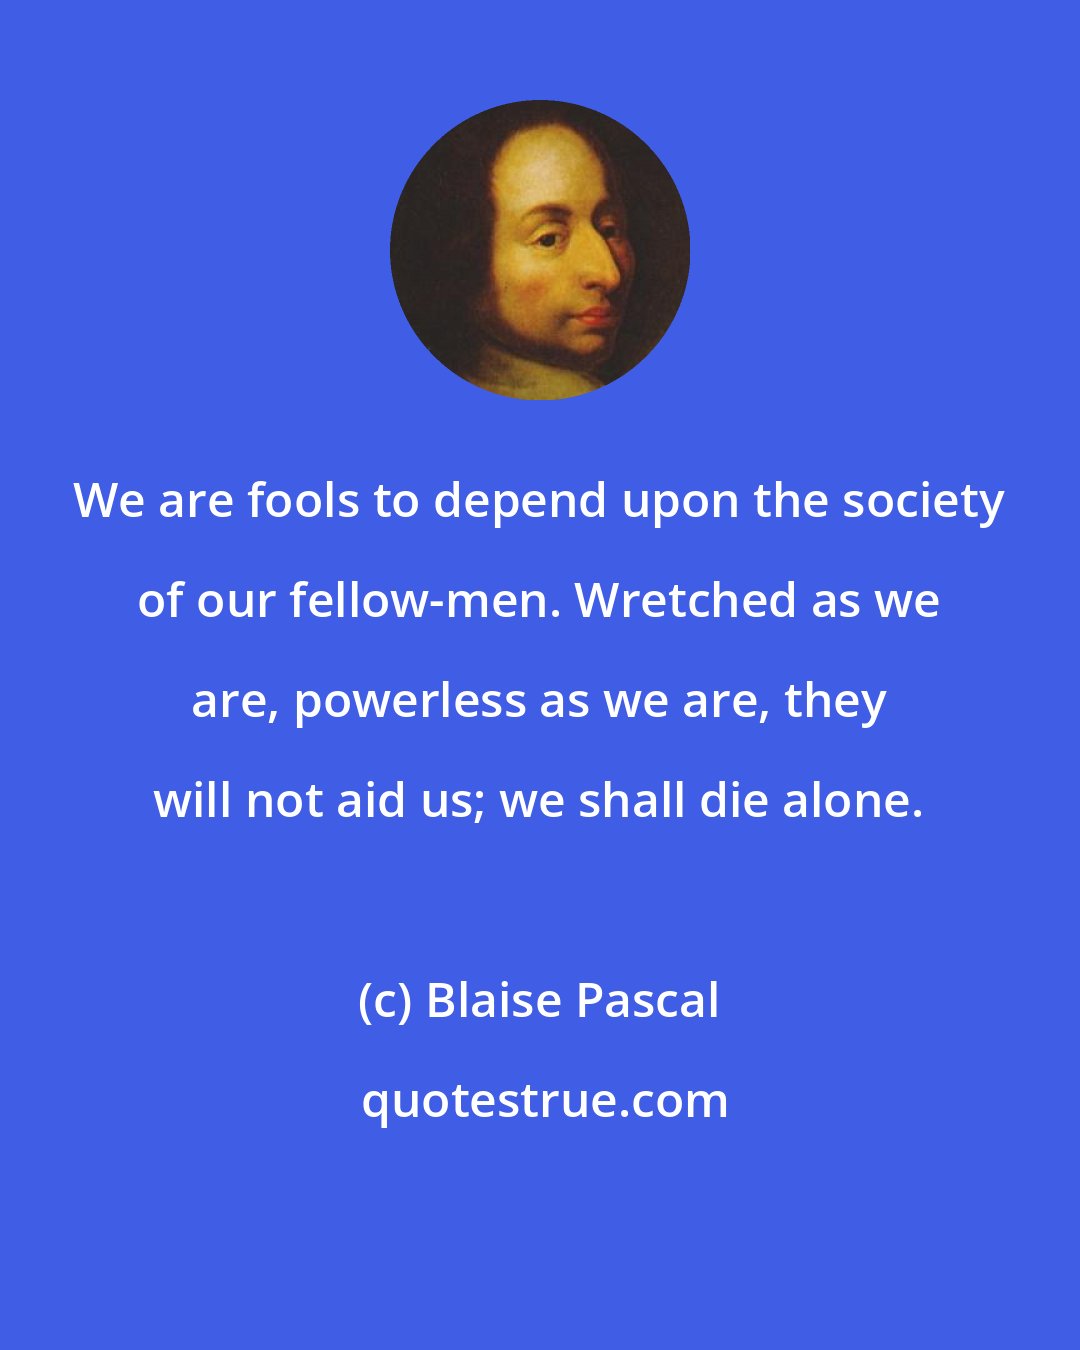 Blaise Pascal: We are fools to depend upon the society of our fellow-men. Wretched as we are, powerless as we are, they will not aid us; we shall die alone.